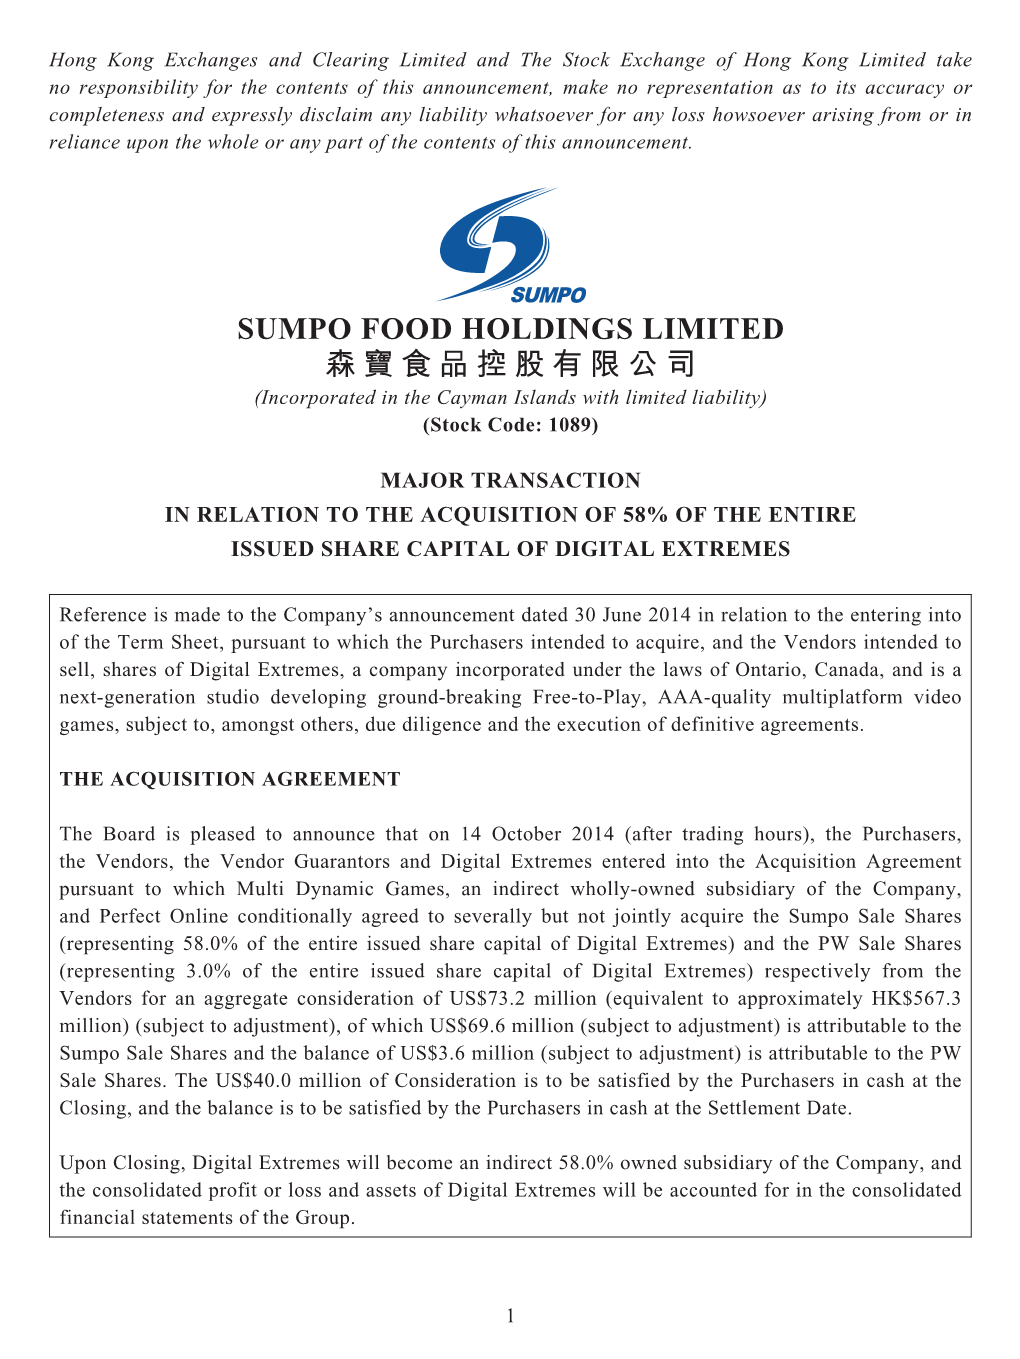 SUMPO FOOD HOLDINGS LIMITED 森寶食品控股有限公司 (Incorporated in the Cayman Islands with Limited Liability) (Stock Code: 1089)